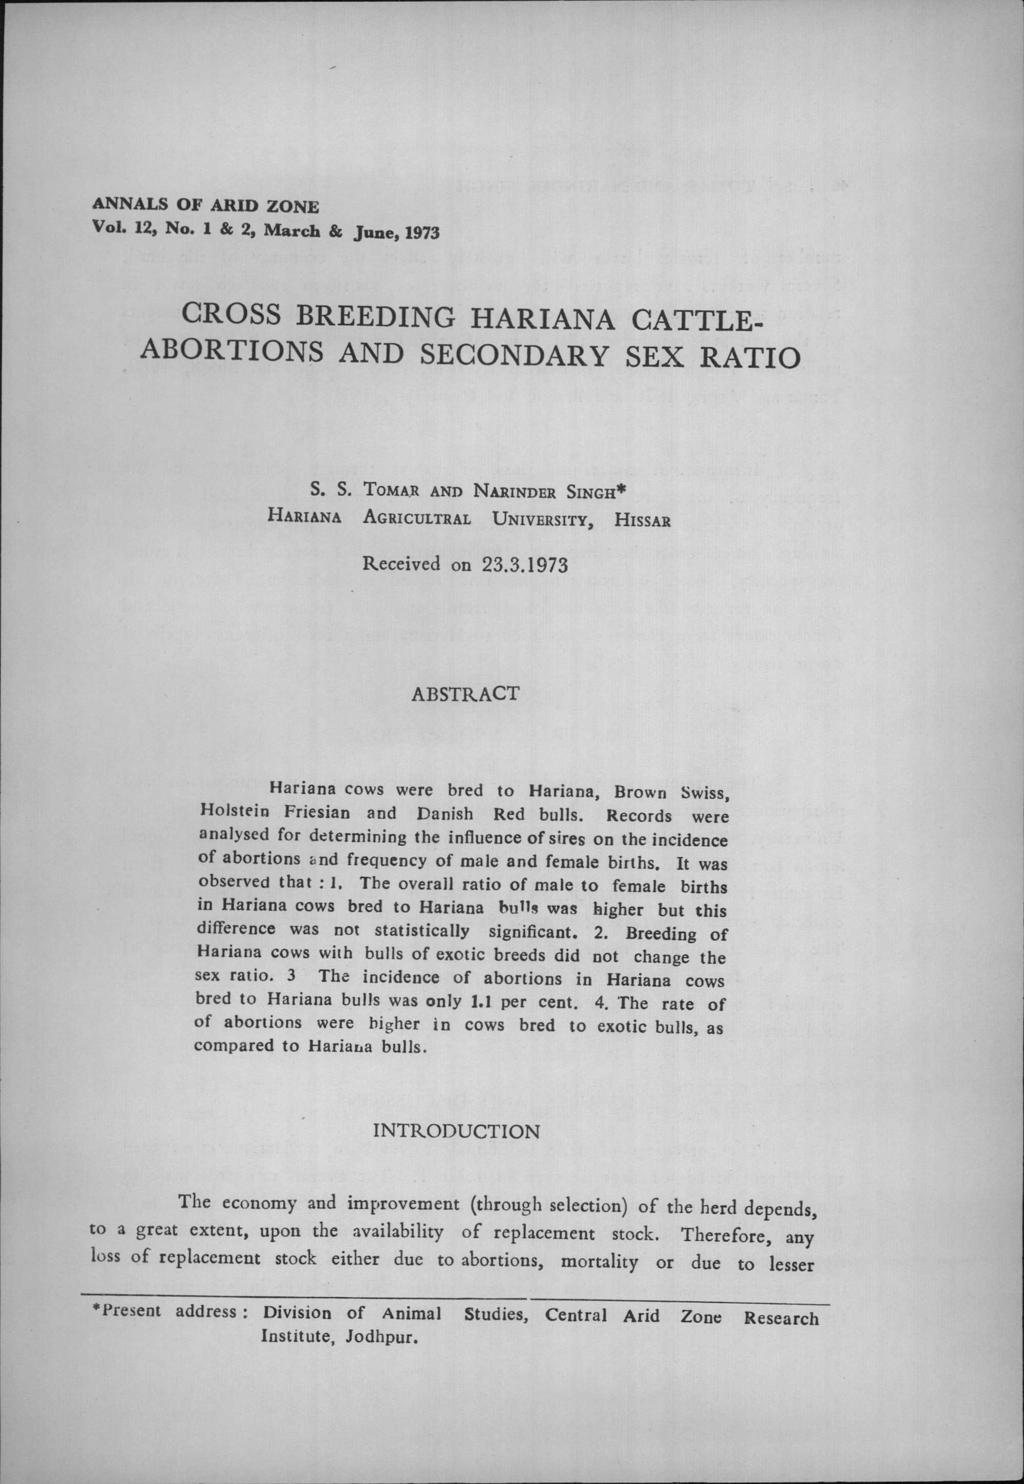 ANNALS OF ARID ZONE Vol. 12, No.1 & 2, March & June, 1973 CROSS BREEDING HARIANA CATTLE. ABORTIONS AND SECONDARY SEX RATIO S. S. TOMA.R AND NAIUNDBR SINGH.